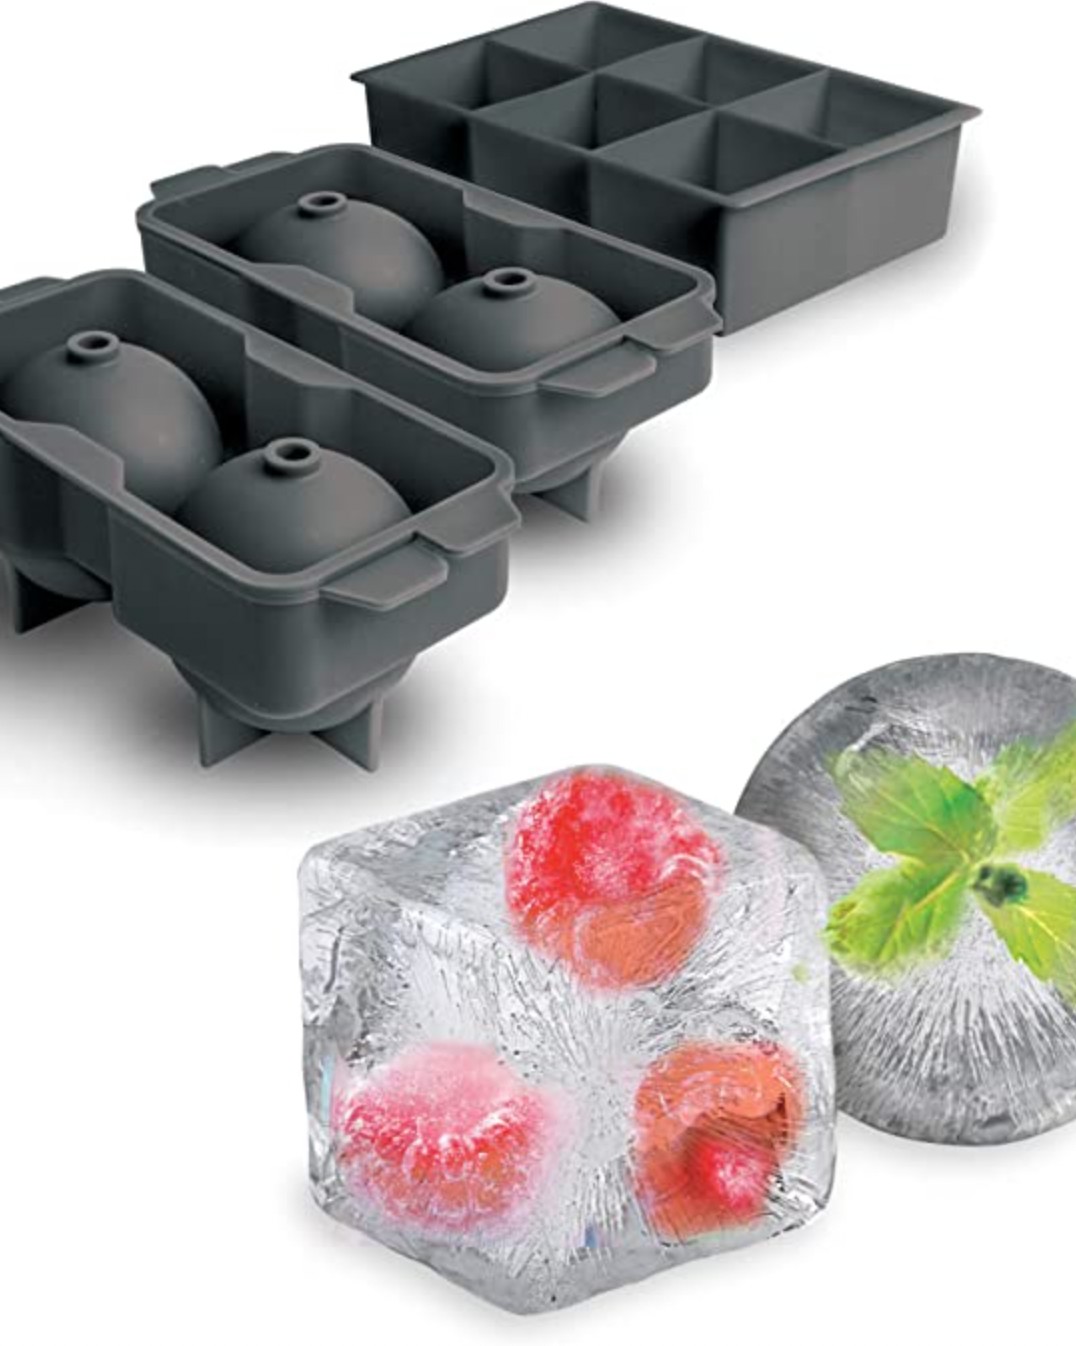 The Best Big Ice Cube Trays for Perfect Cocktails